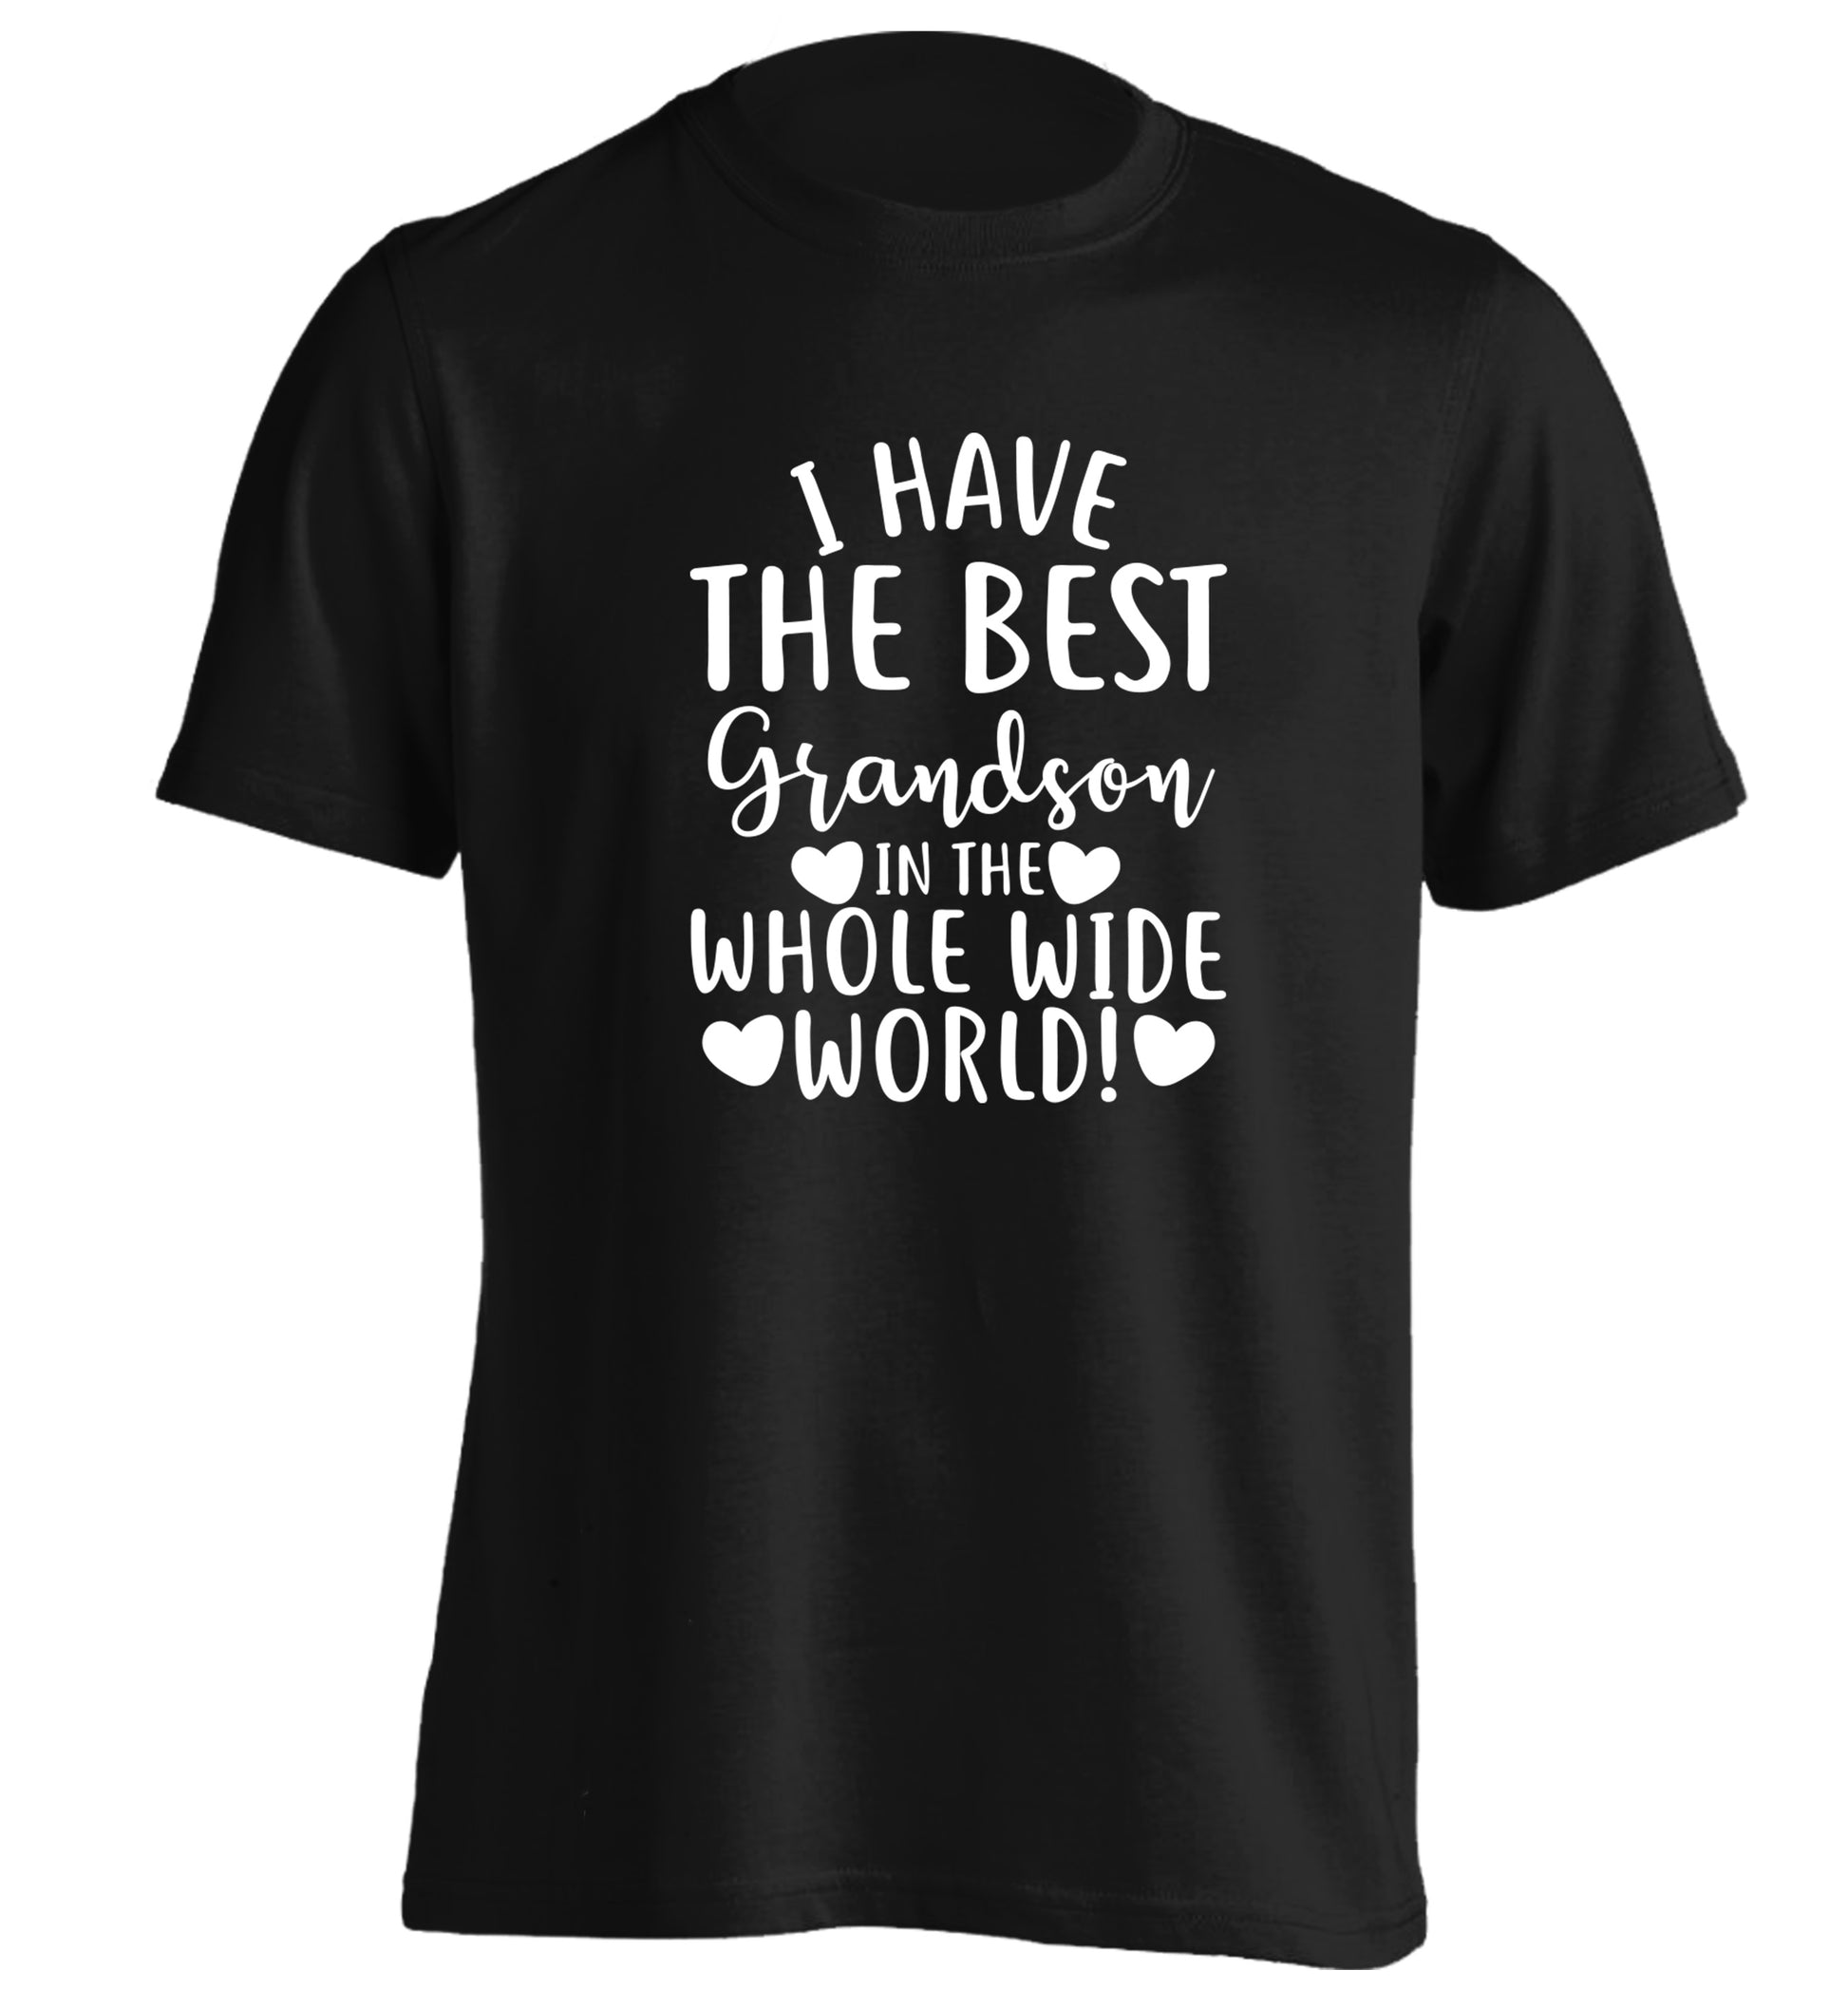 I have the best grandson in the whole wide world! adults unisex black Tshirt 2XL